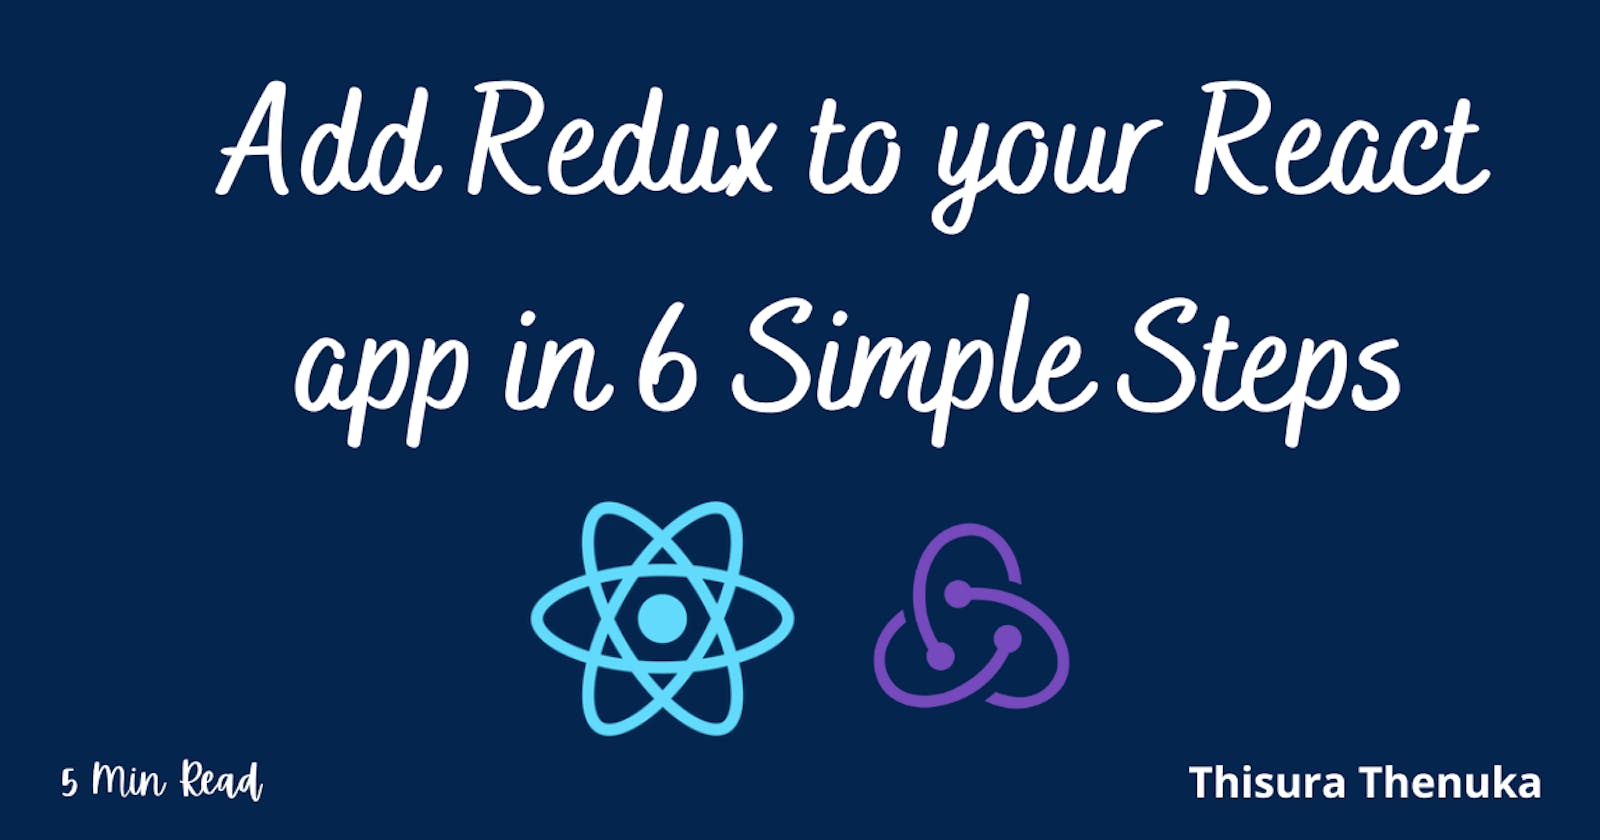 Add Redux to your React app in 6 Simple Steps